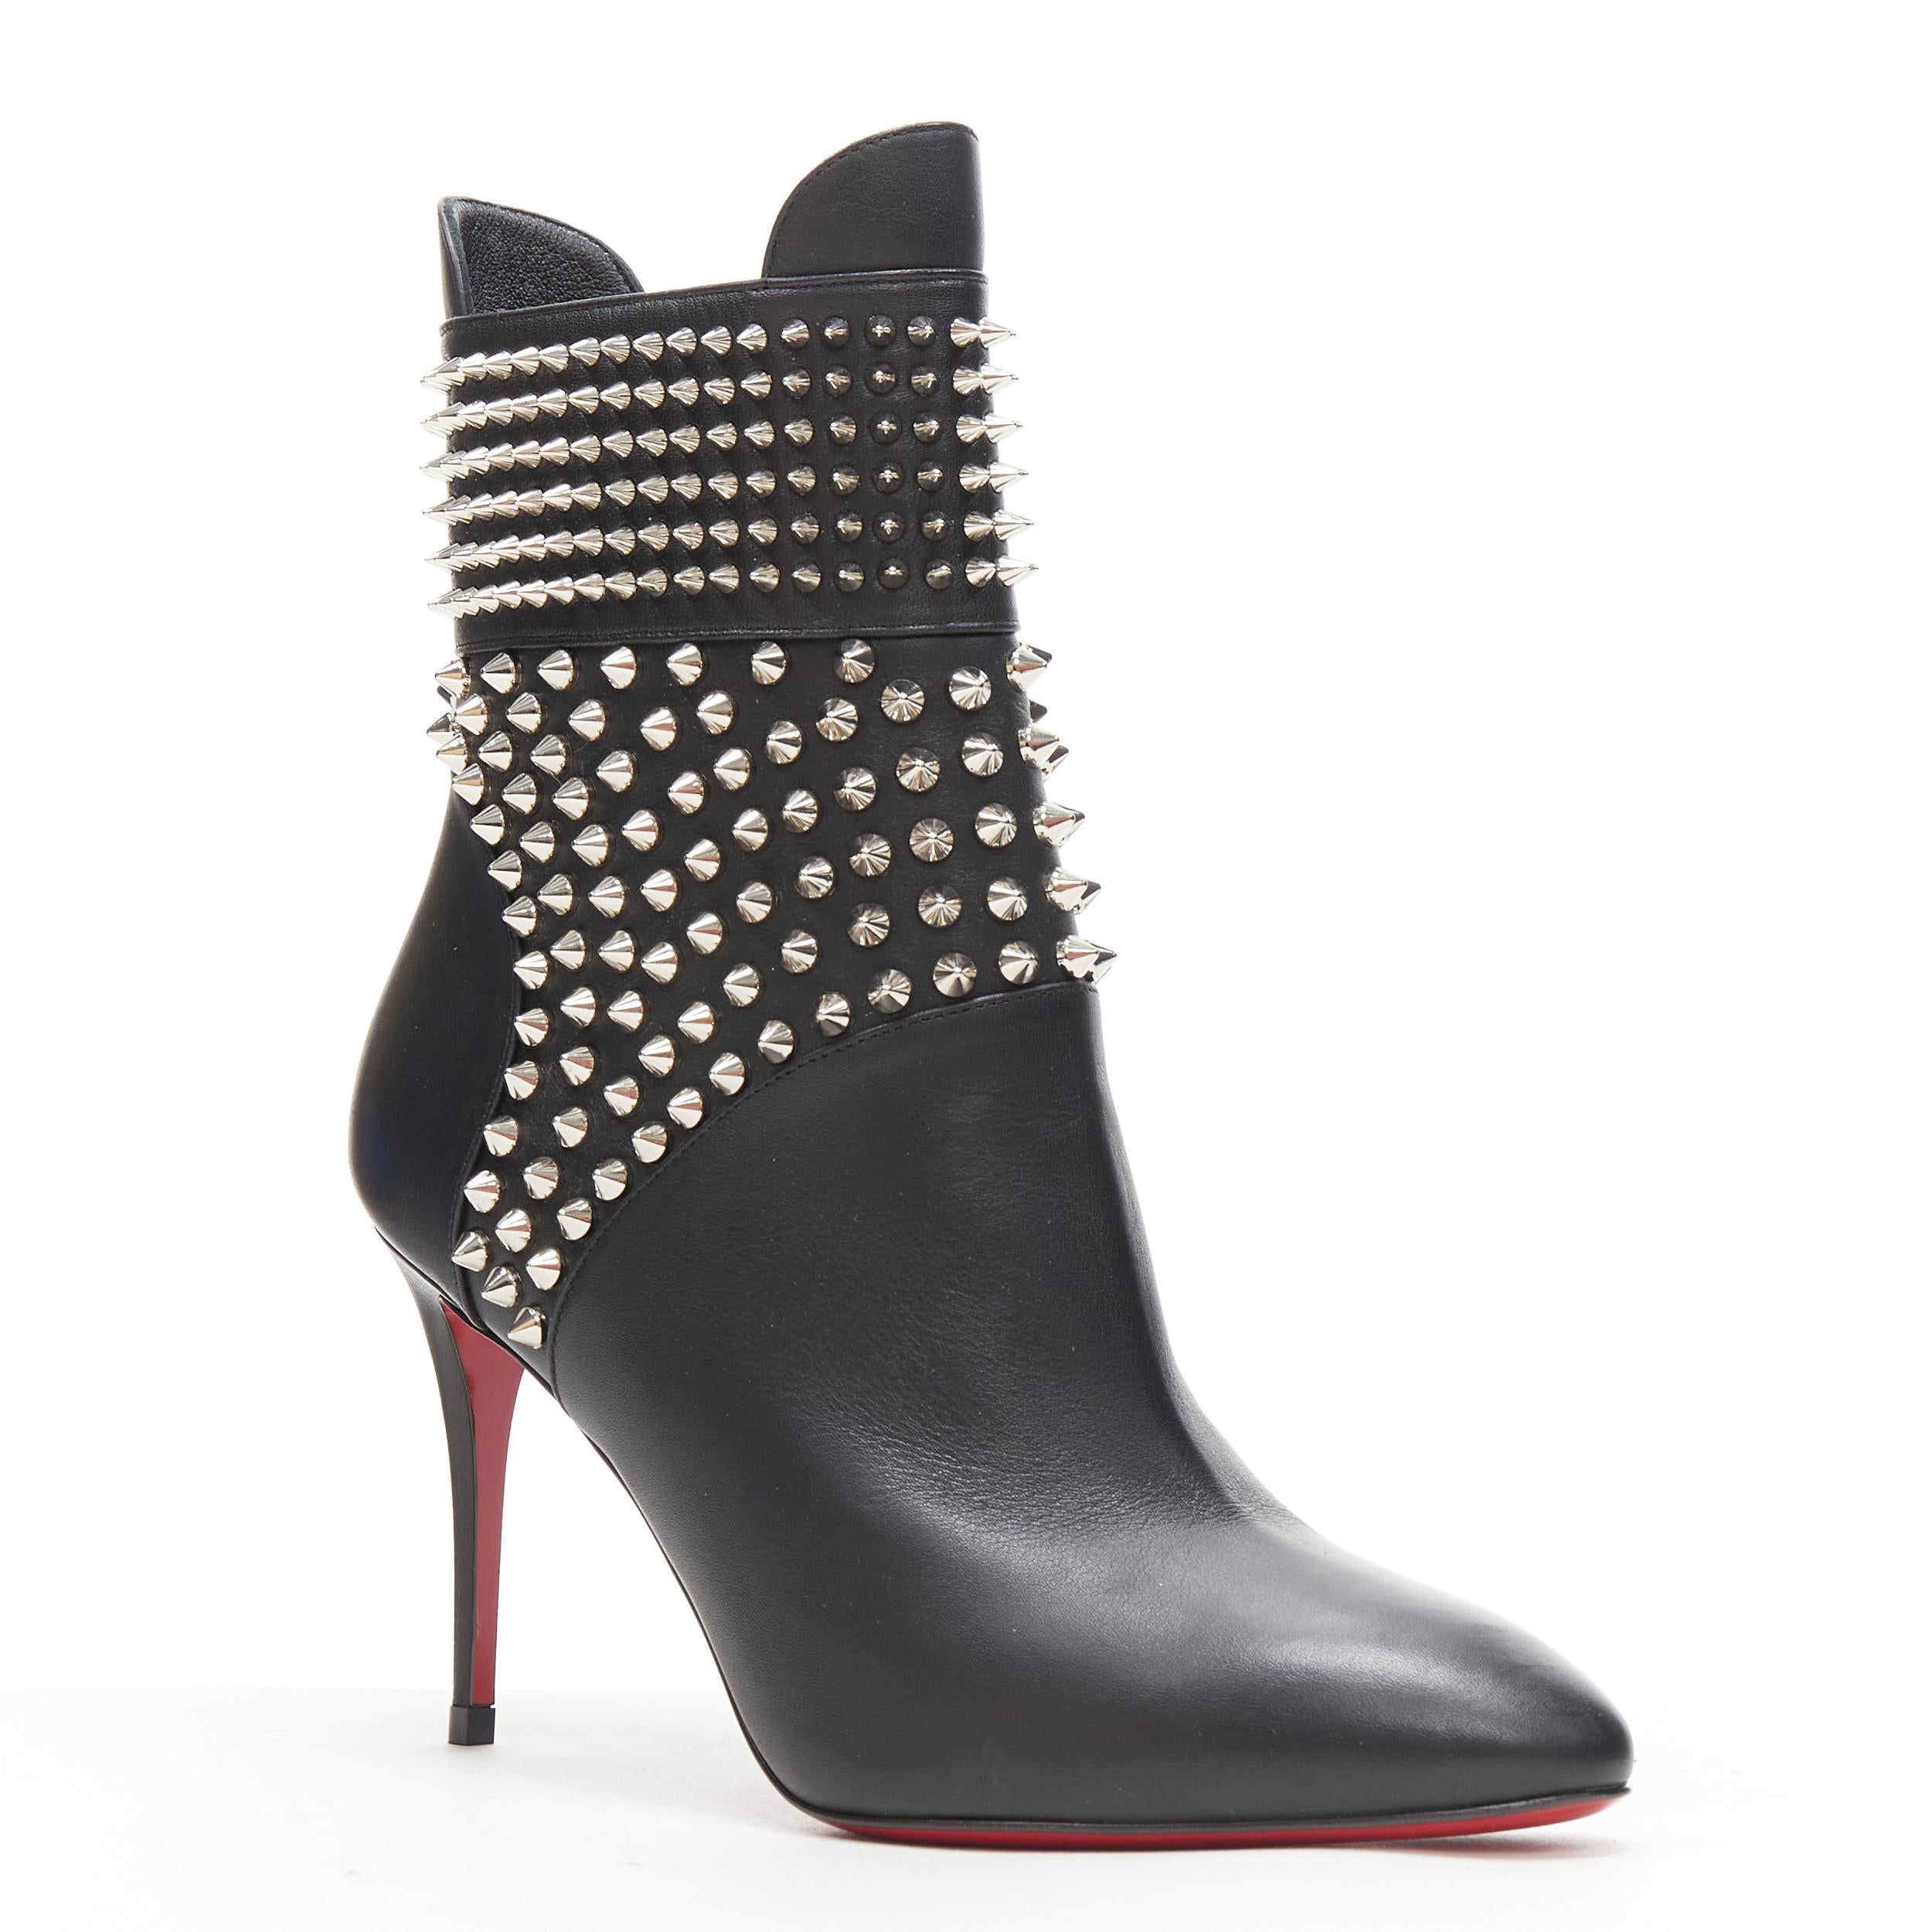 new CHRISTIAN LOUBOUTIN Hongroise black leather spike stud punk bootie EU37 Reference: TGAS/B01058 
Brand: Christian Louboutin 
Designer: Christian Louboutin 
Material: Leather 
Color: Black 
Pattern: Solid 
Closure: Zip 
Extra Detail: Hongroise